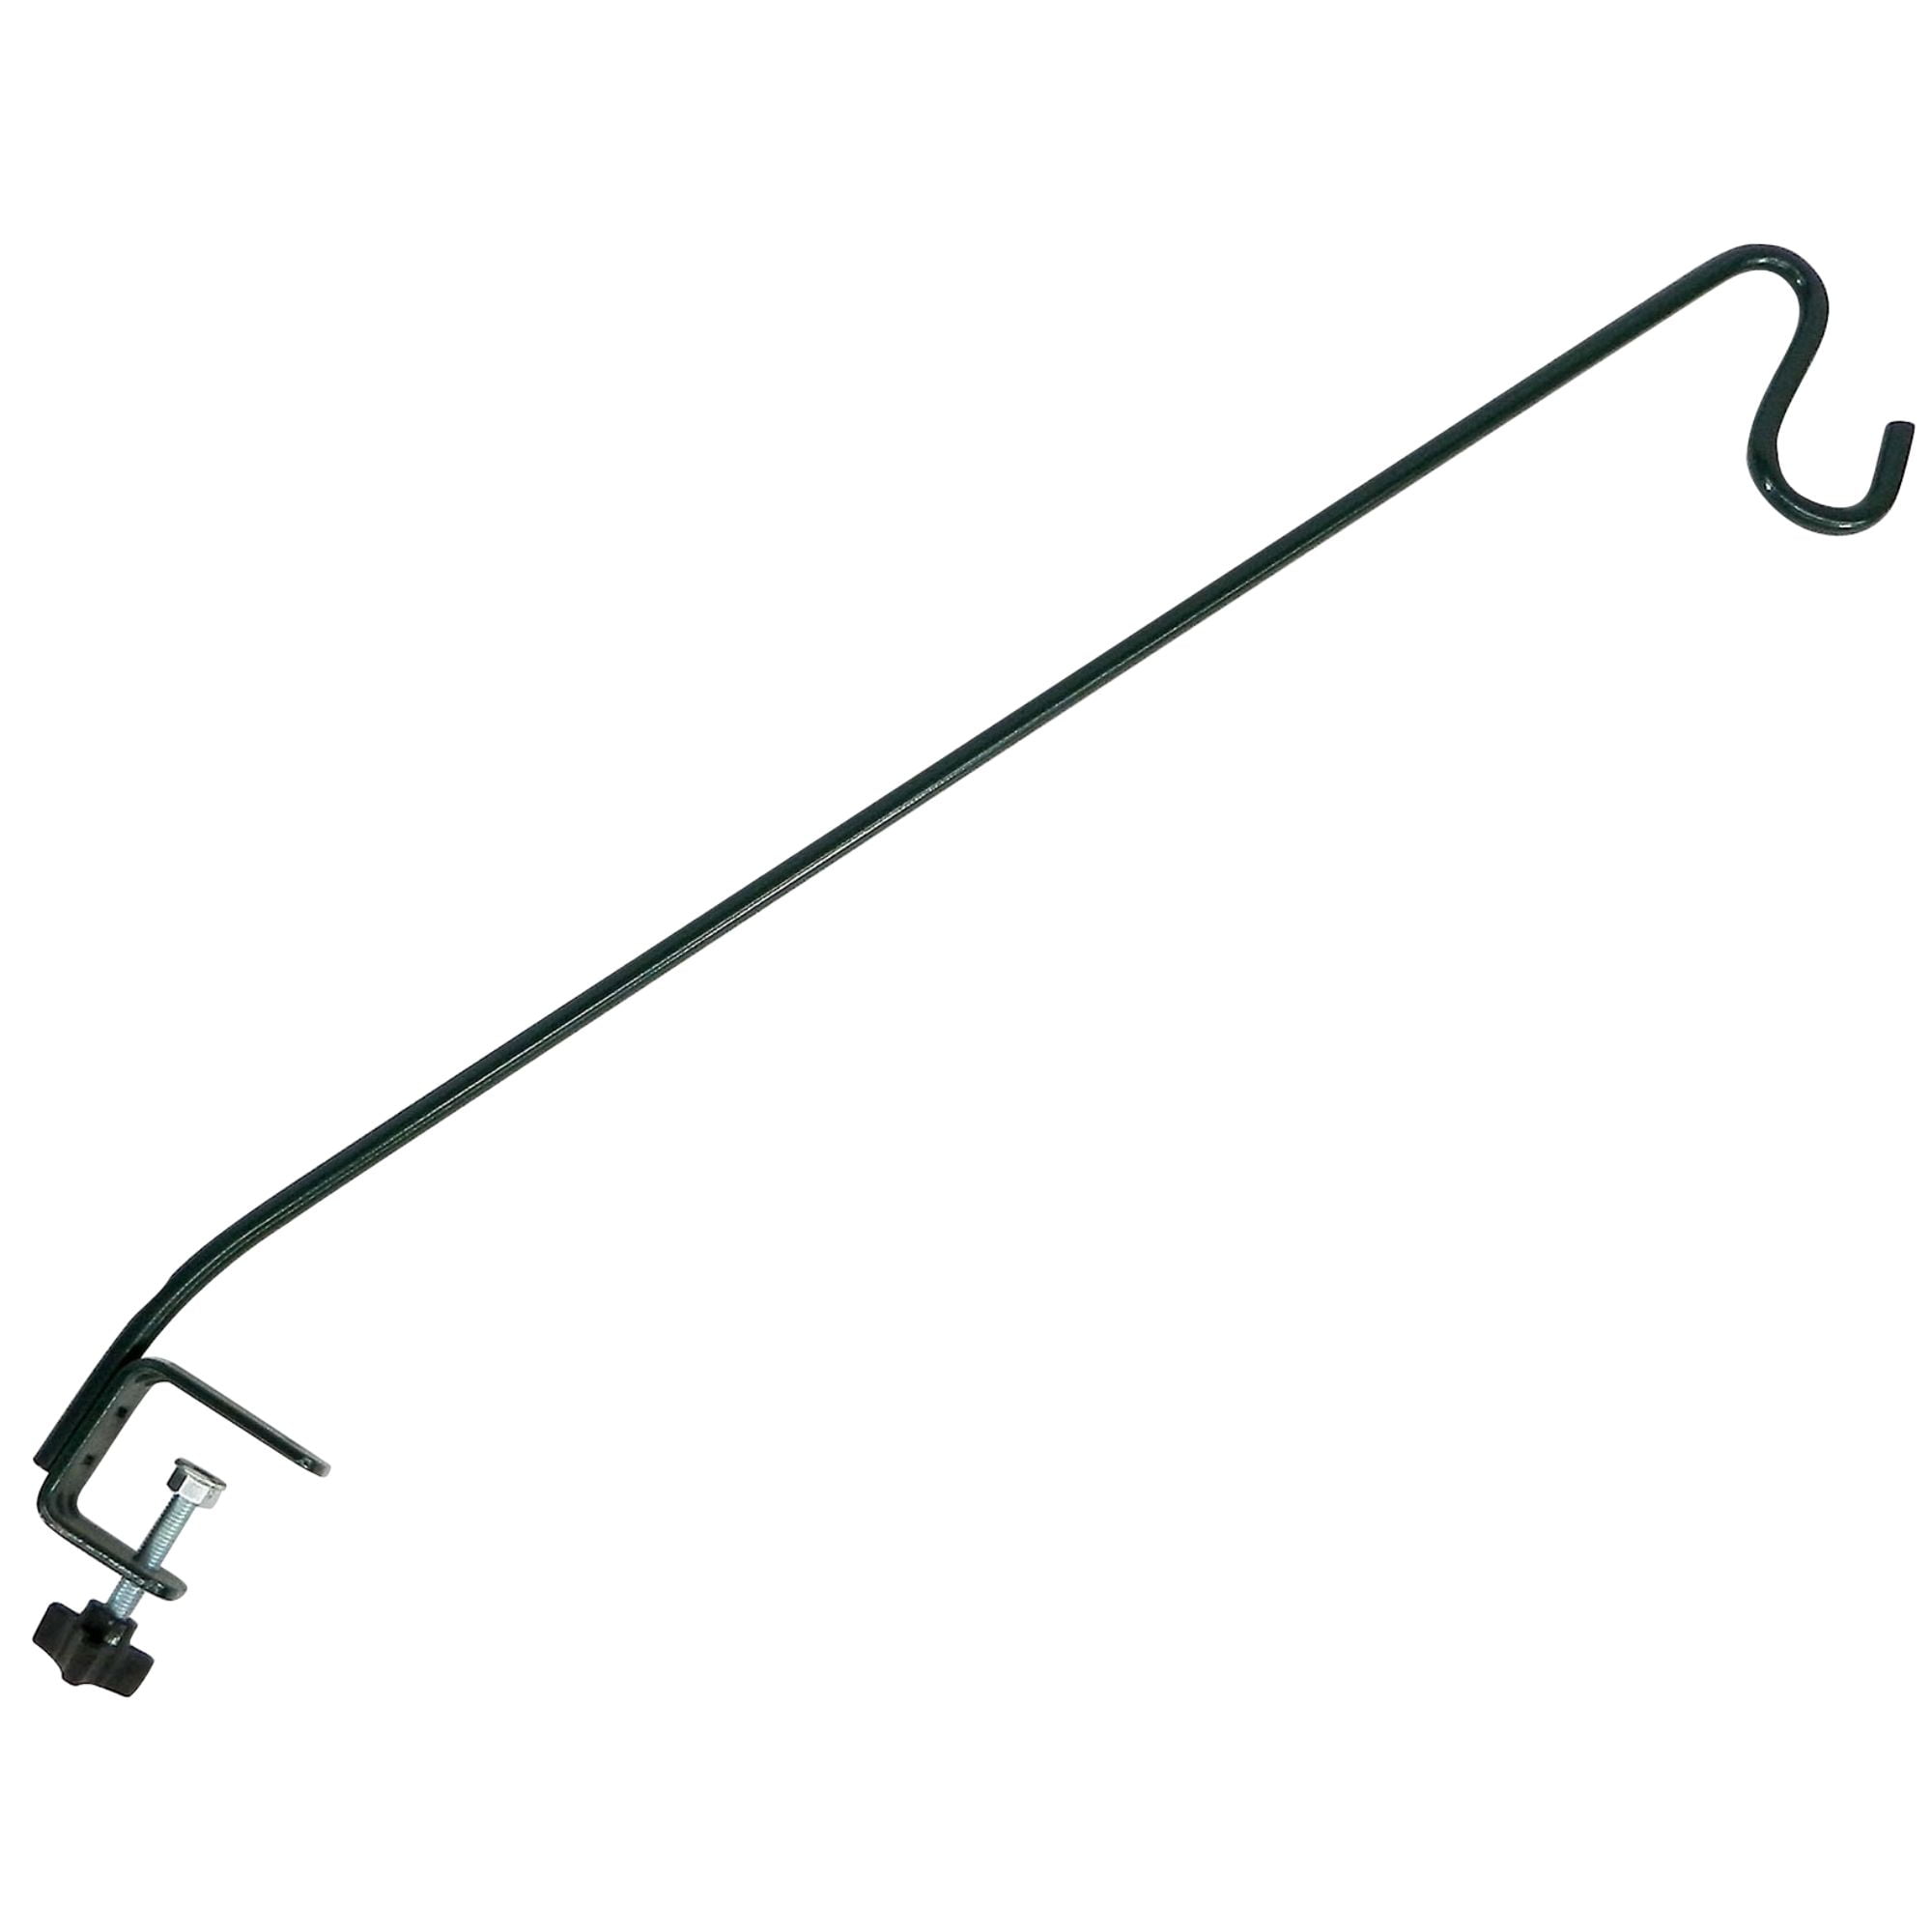 Stokes Select 27-Inch Metal Extended Reach Deck Hook with 360 Degree Swing for Bird Feeders